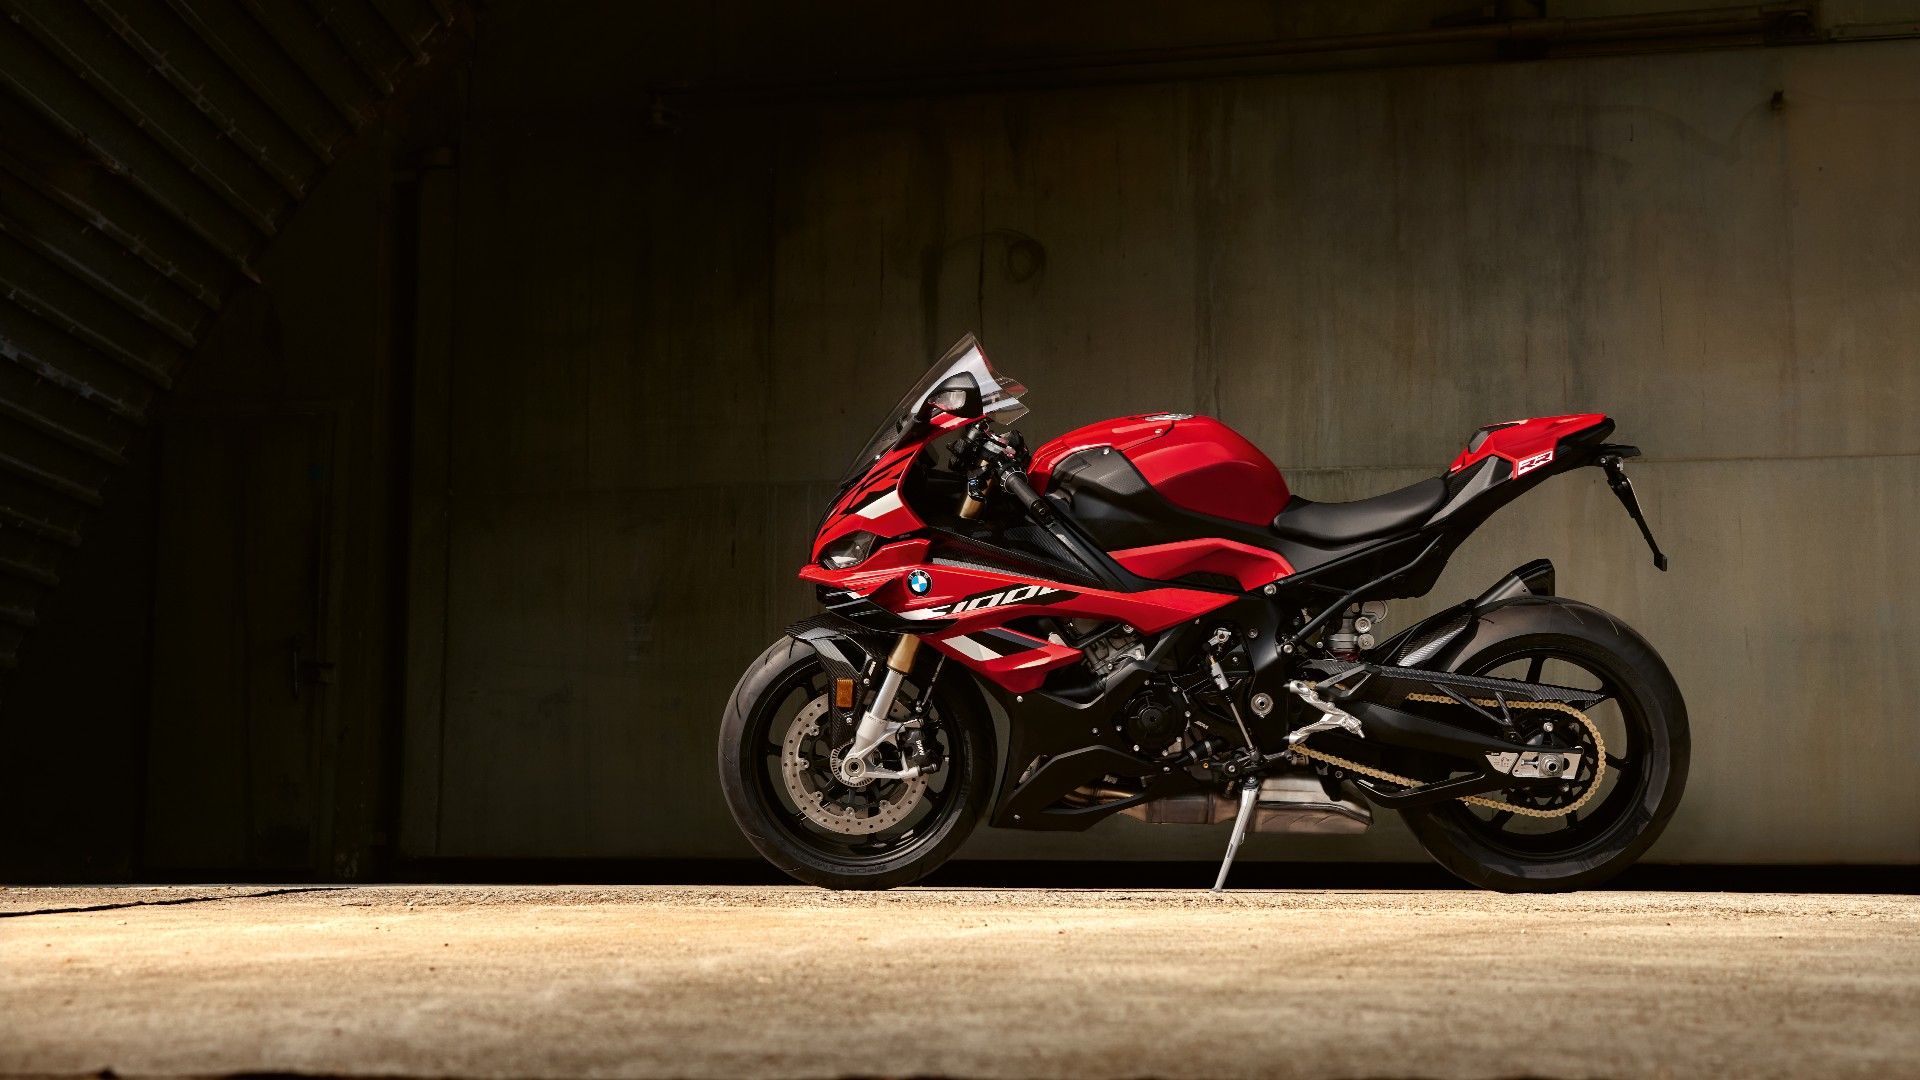 10 Reasons Why The BMW S1000RR is the Ultimate Superbike